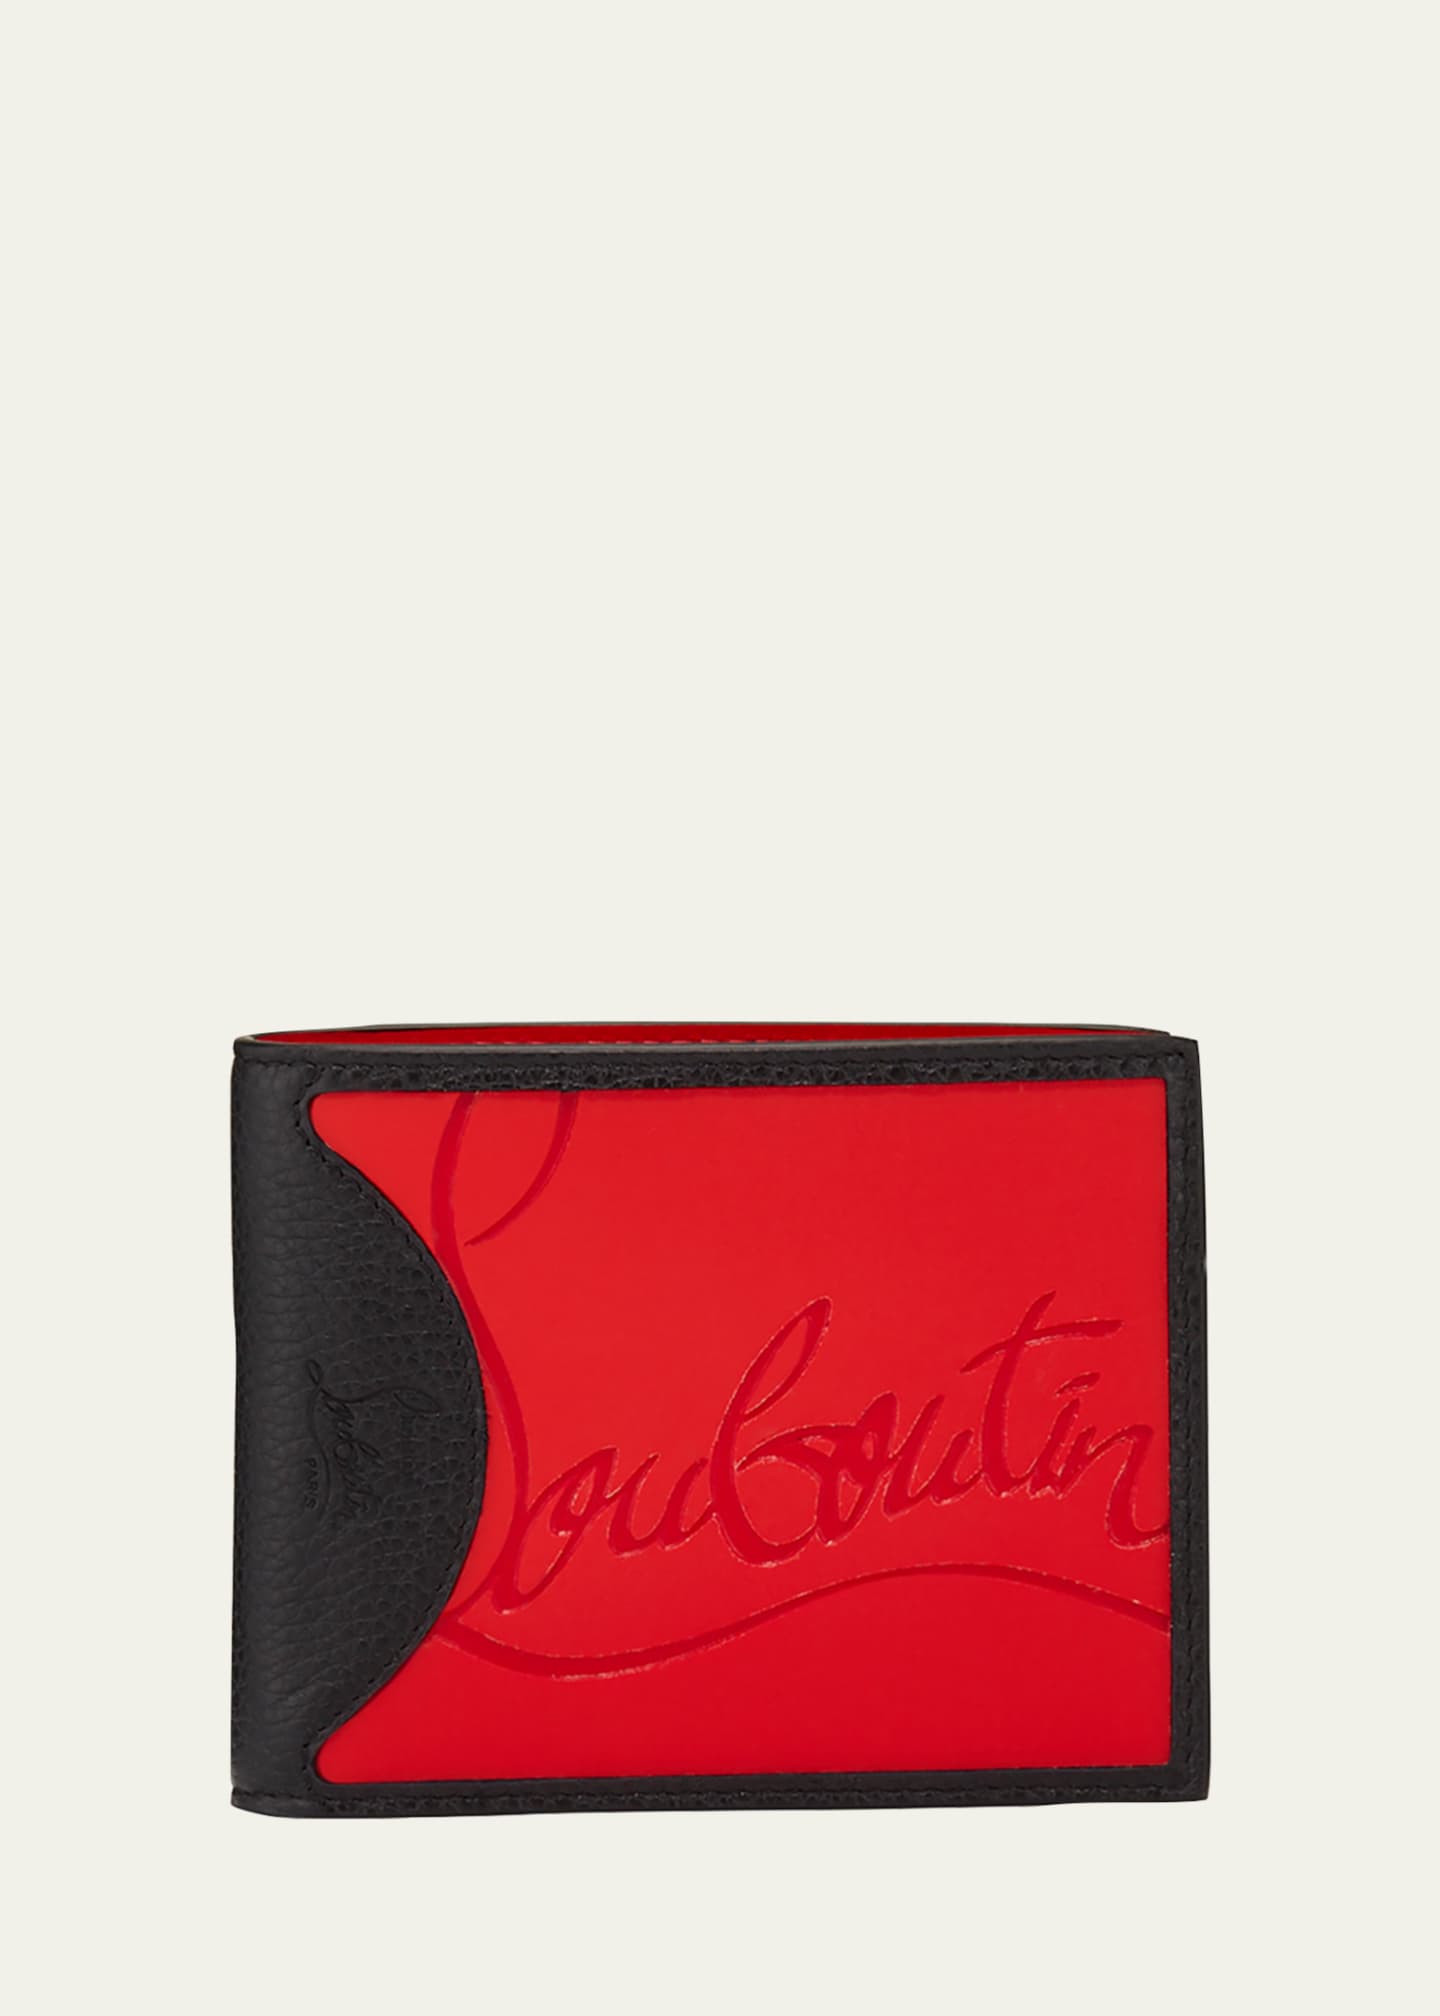 Christian Louboutin Men's Coolcard Two-Tone Leather Wallet Image 1 of 2